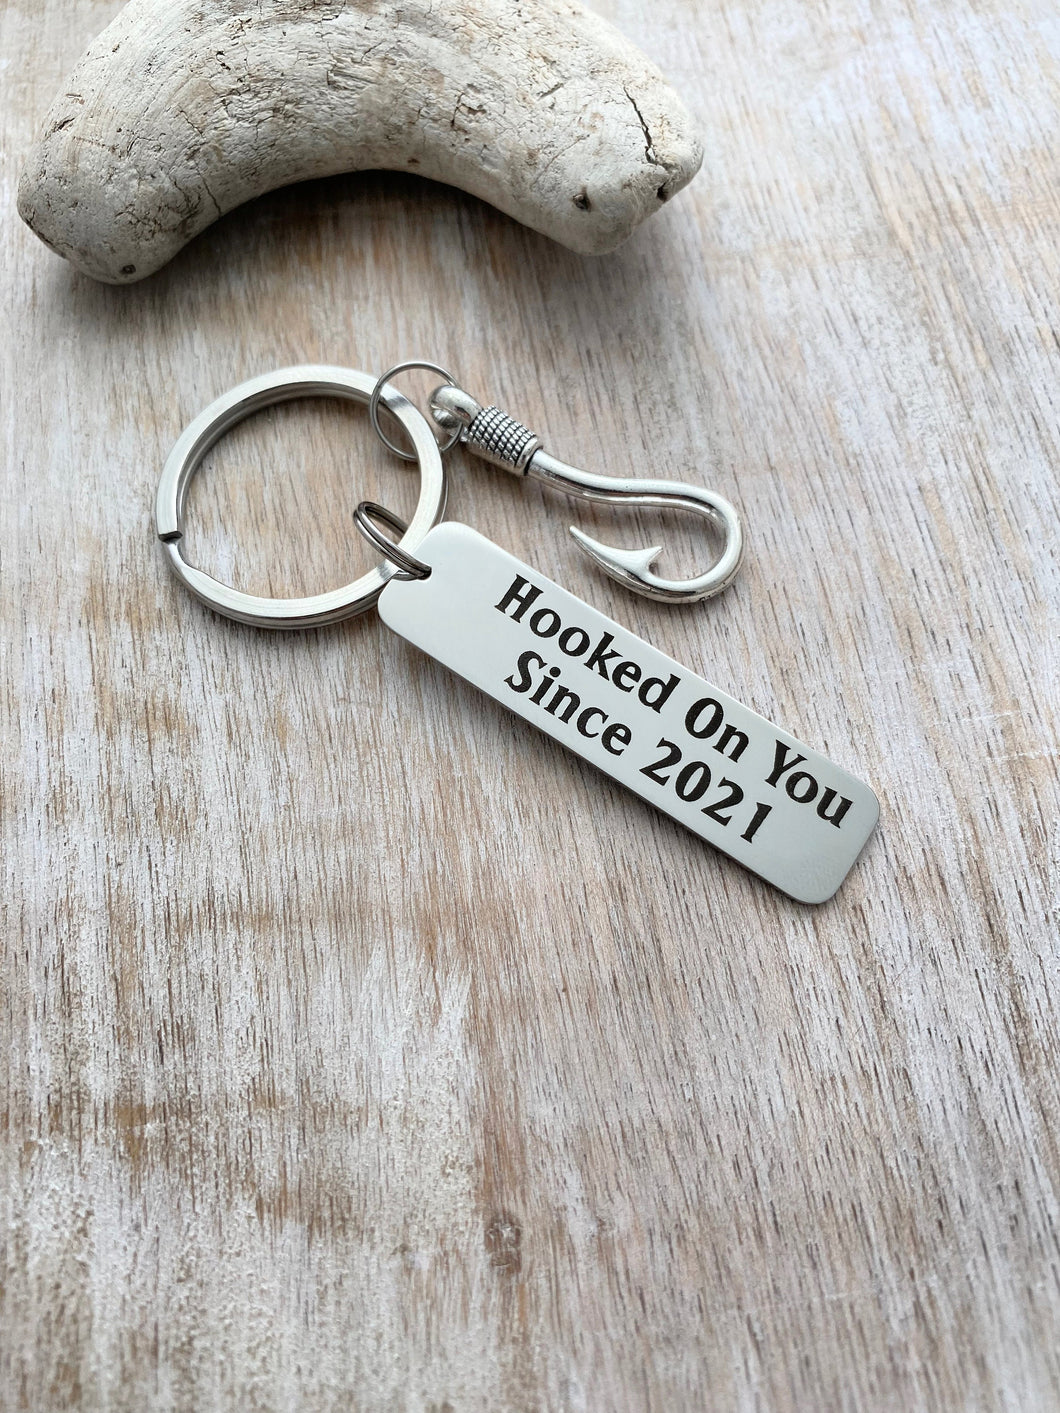 Hooked on you Since with year keychain - Stainless steel  Bar Key Chain - fishing hook charm - Valentine's Day gift for boyfriend or husband